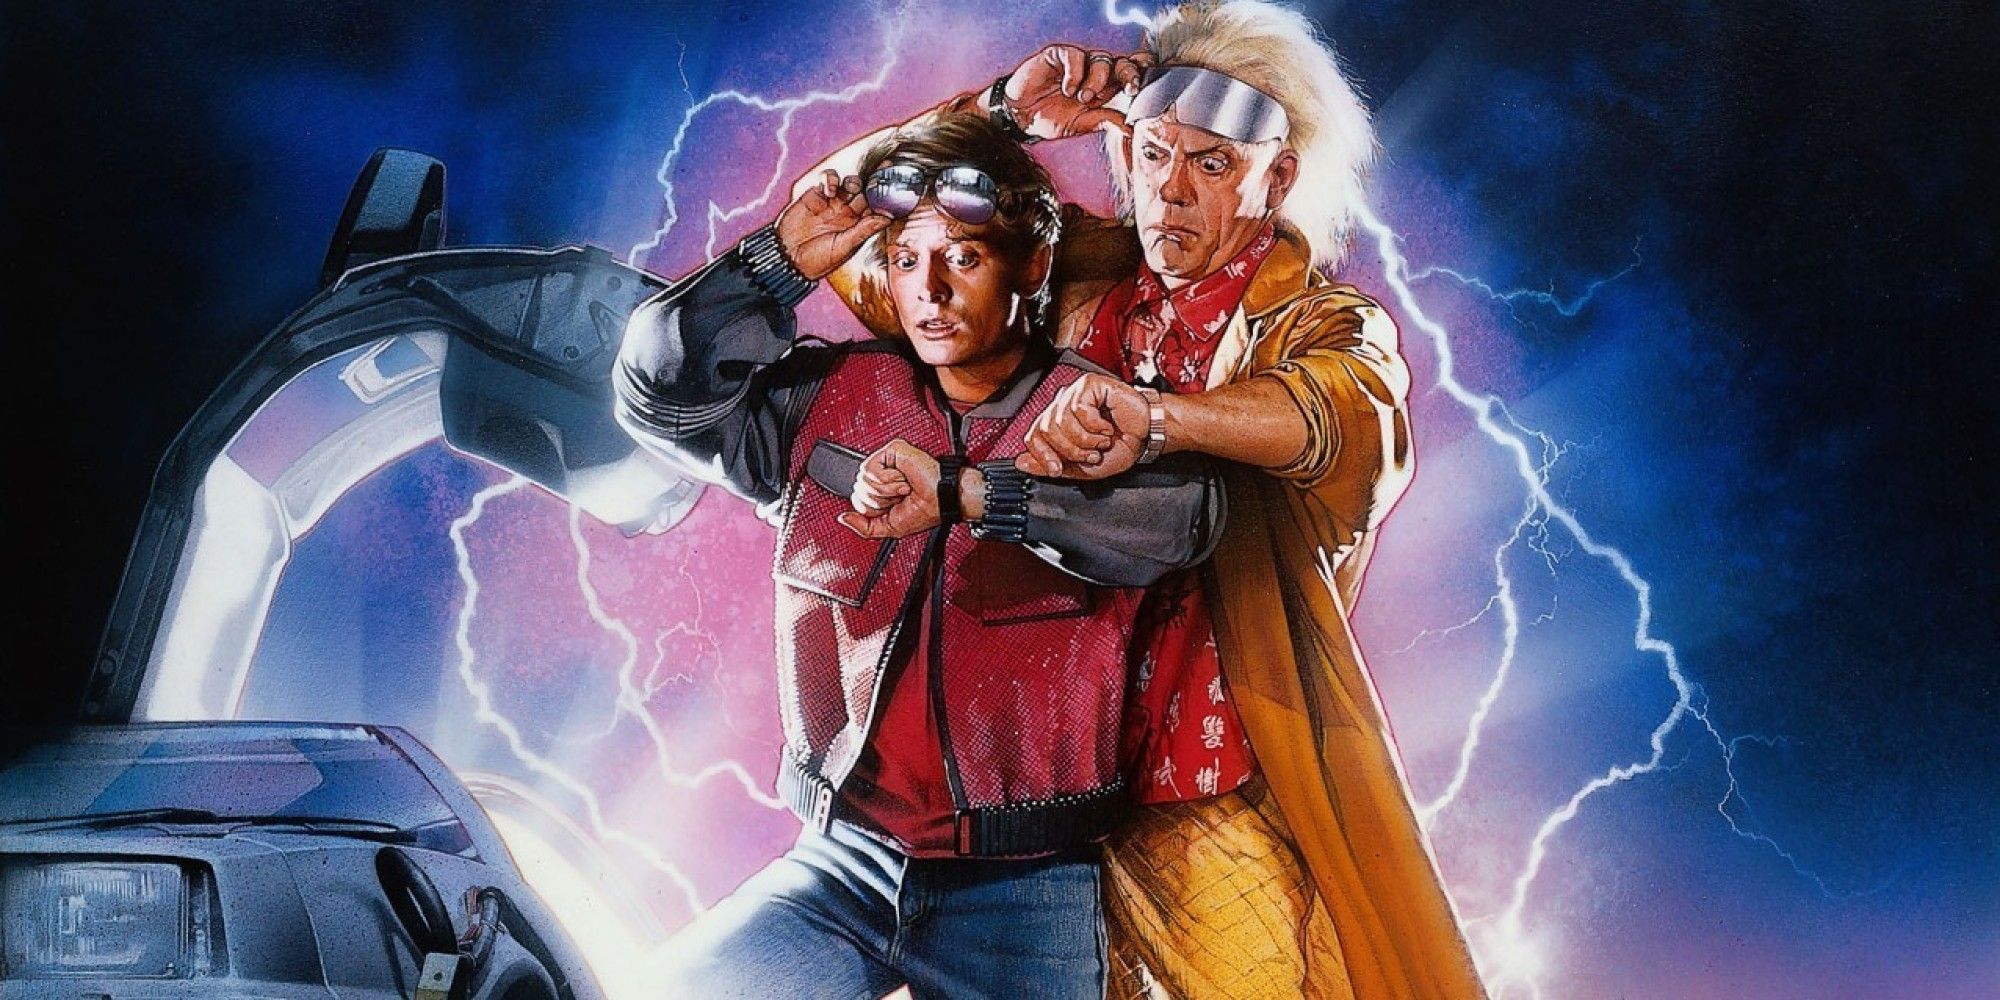 Poster showing Marty and Doc checking their watches in 'Back to the Future'